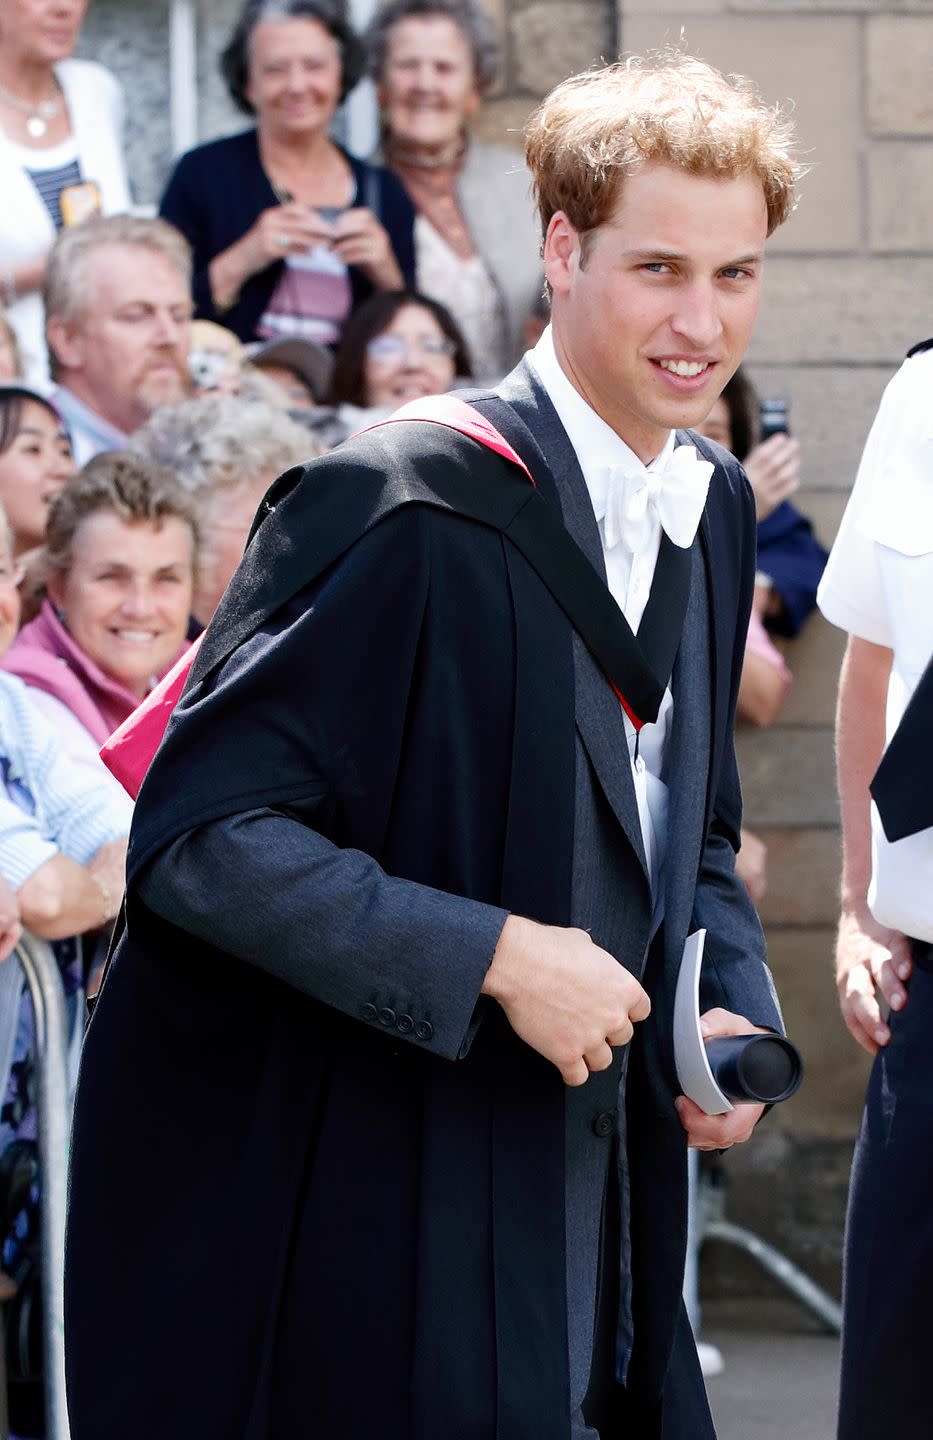 prince william attends his graduation ceremony at the university of st andrews